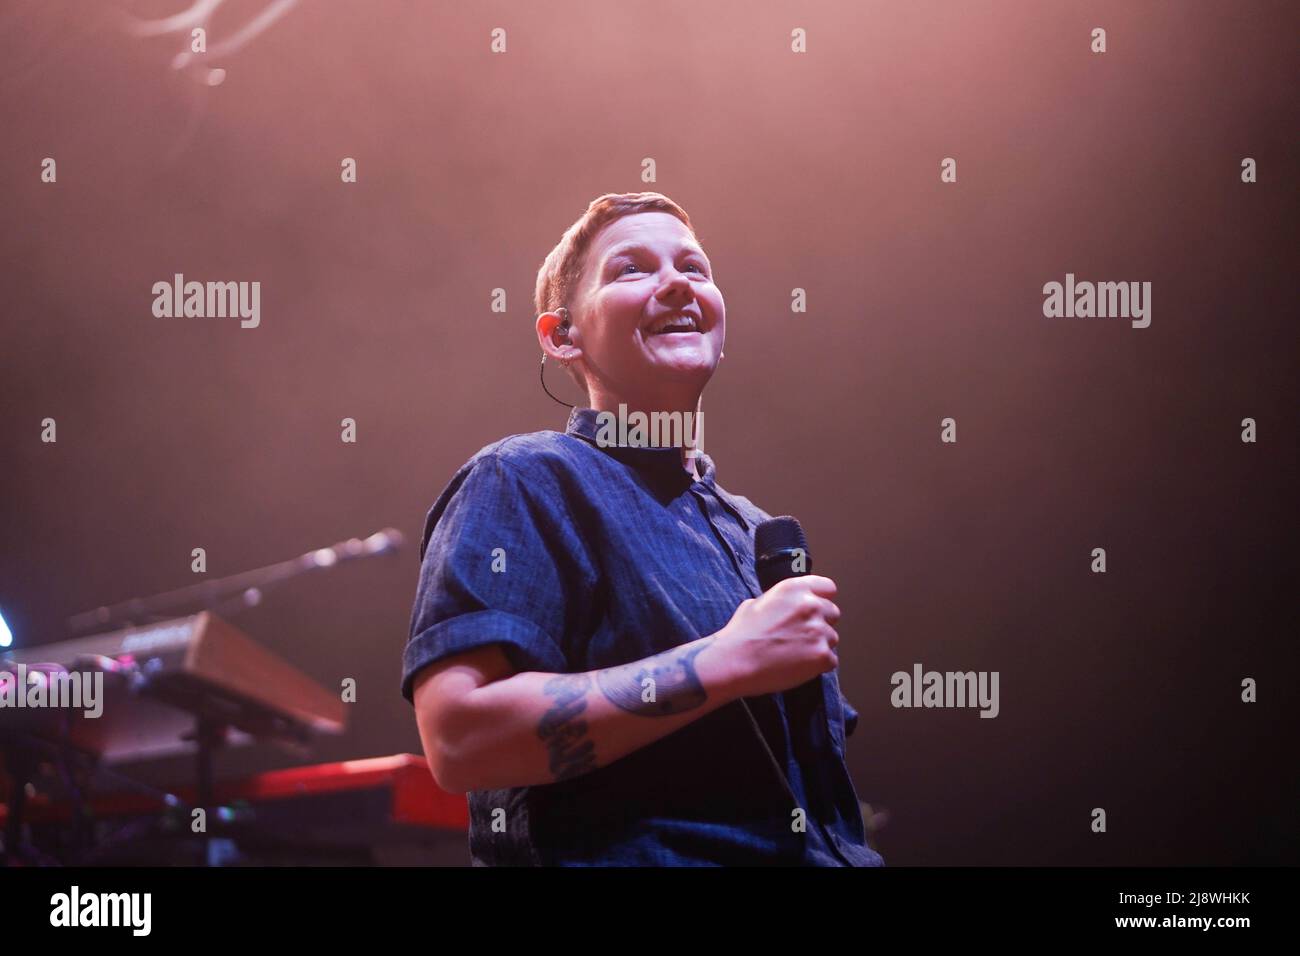 London, UK. Wednesday, 18 May, 2022. Kae Tempest performing live on stage at the Shepherds Bush O2 Empire in London. Photo: Richard Gray/Alamy Live News Stock Photo